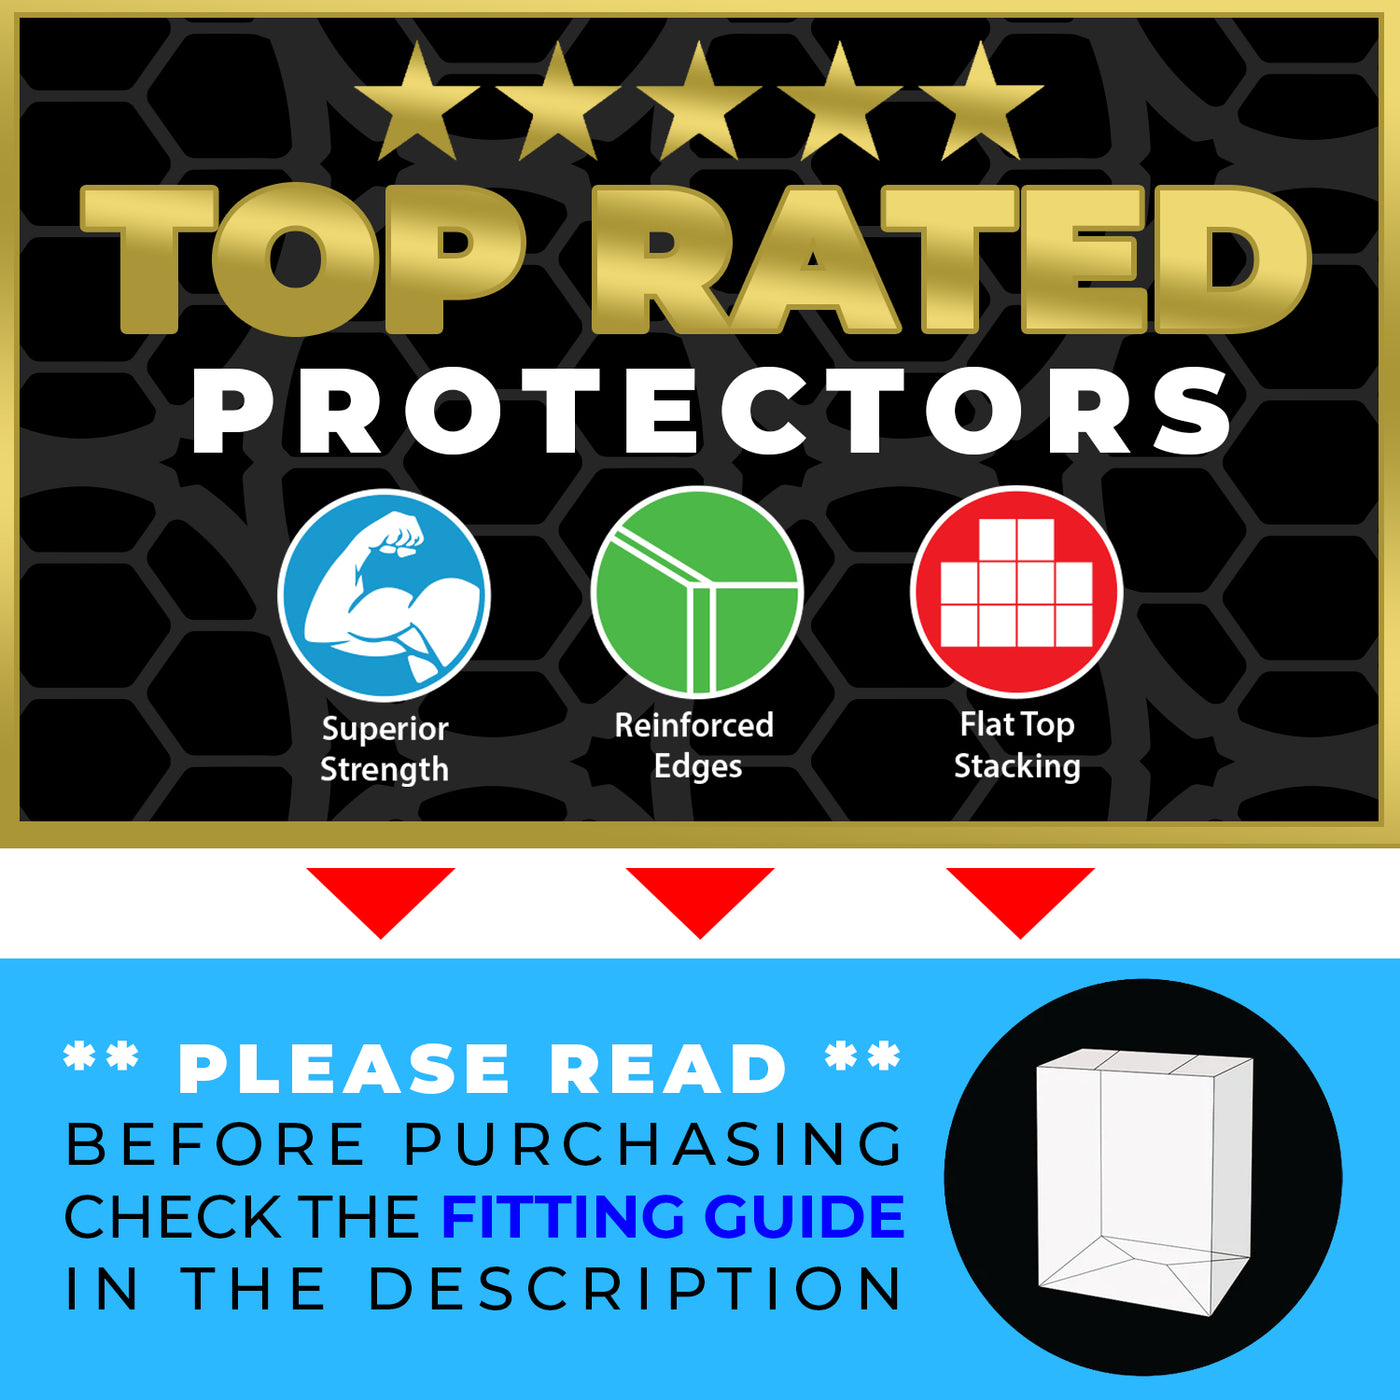 pop games gelatinous cube best funko pop protectors thick strong uv scratch flat top stack vinyl display geek plastic shield vaulted eco armor fits collect protect display case kollector protector